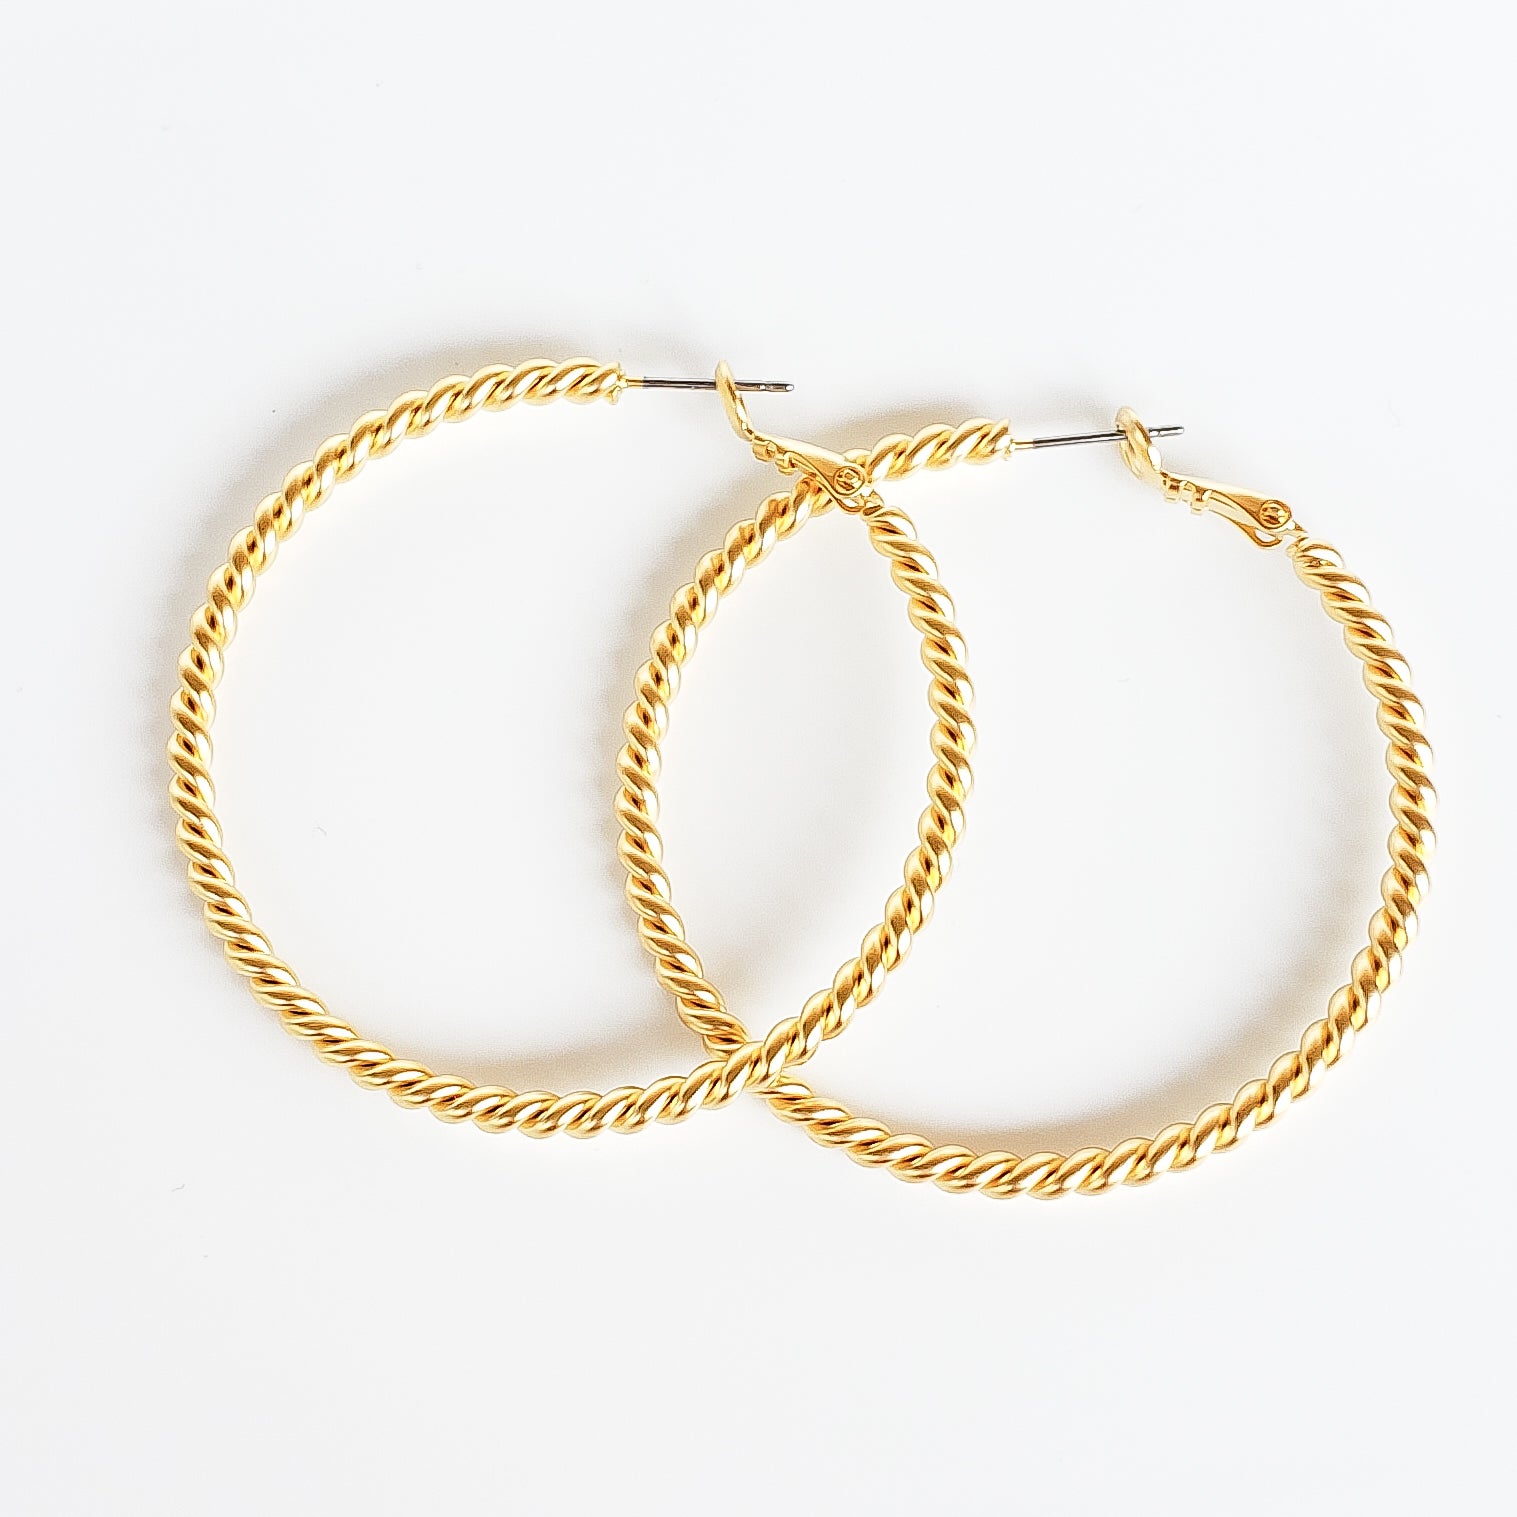 Twisted Rope Hoops